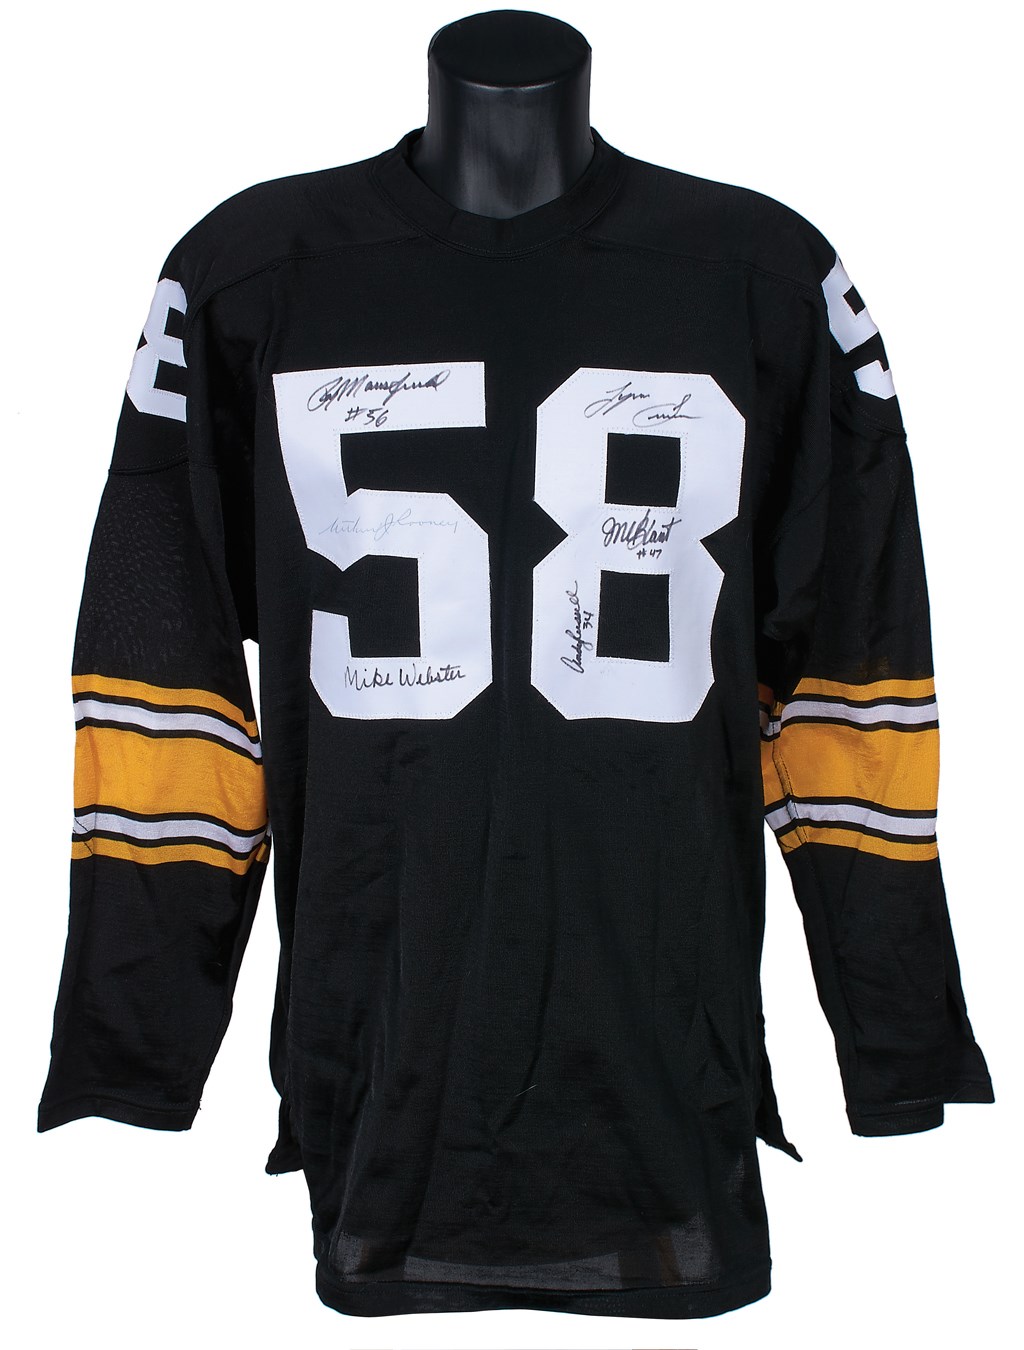 Football - Pittsburgh Steelers Hall of Famers and Stars Signed Jersey with Art Rooney